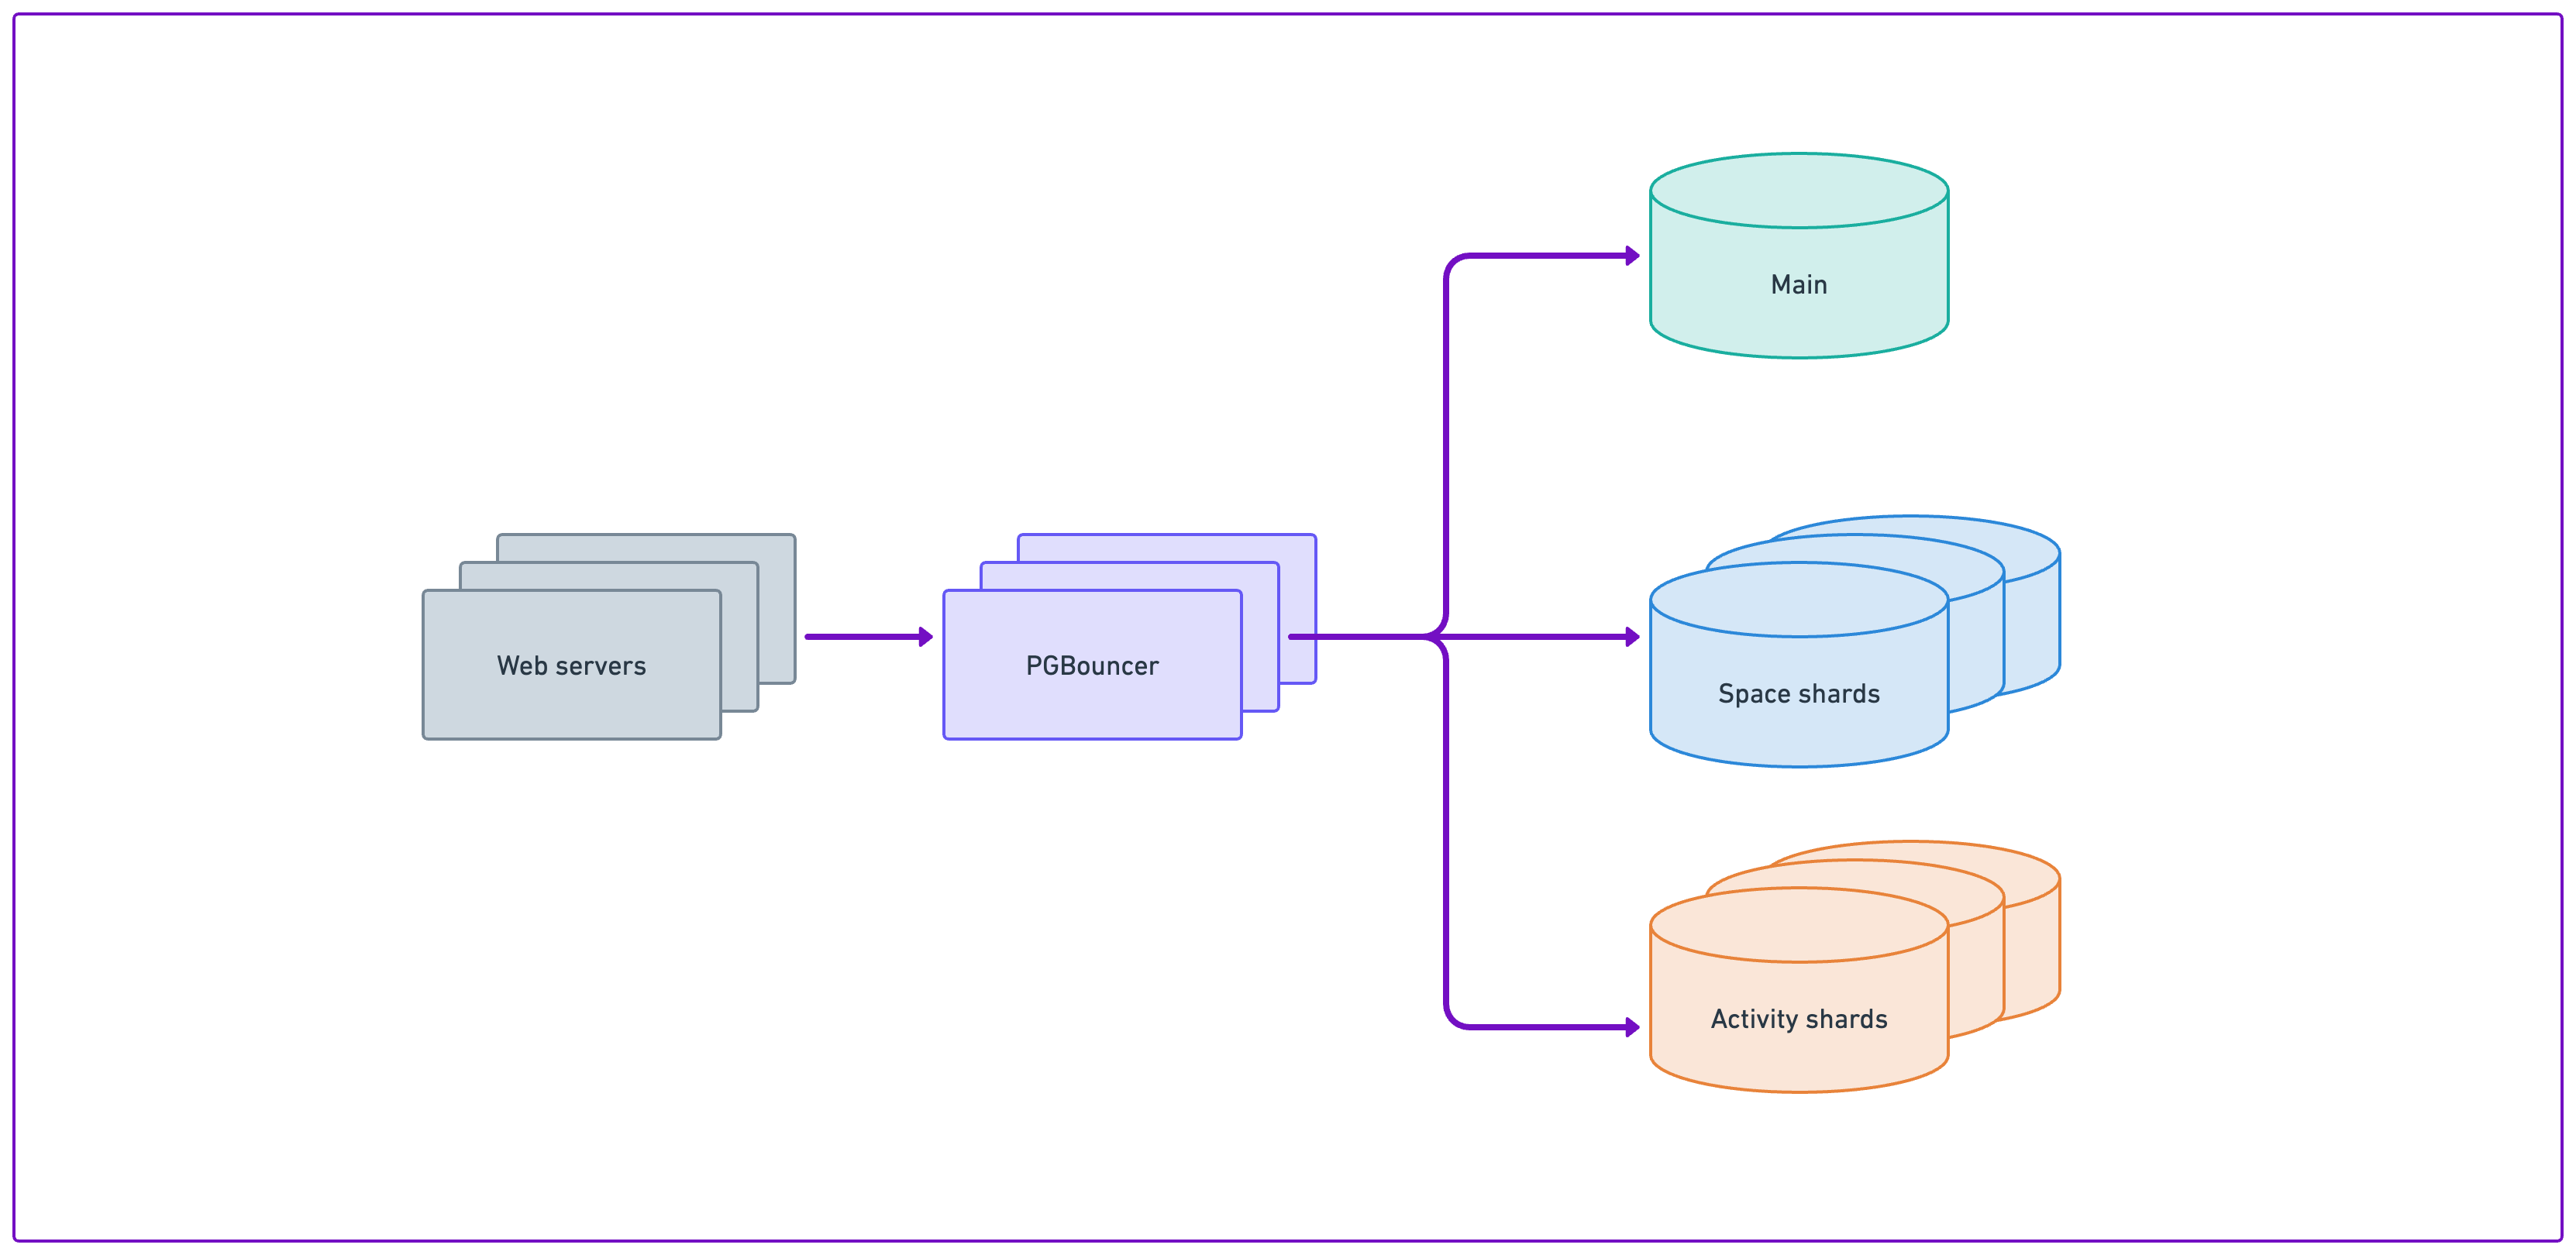 A high-level overview of database architecture at Notion